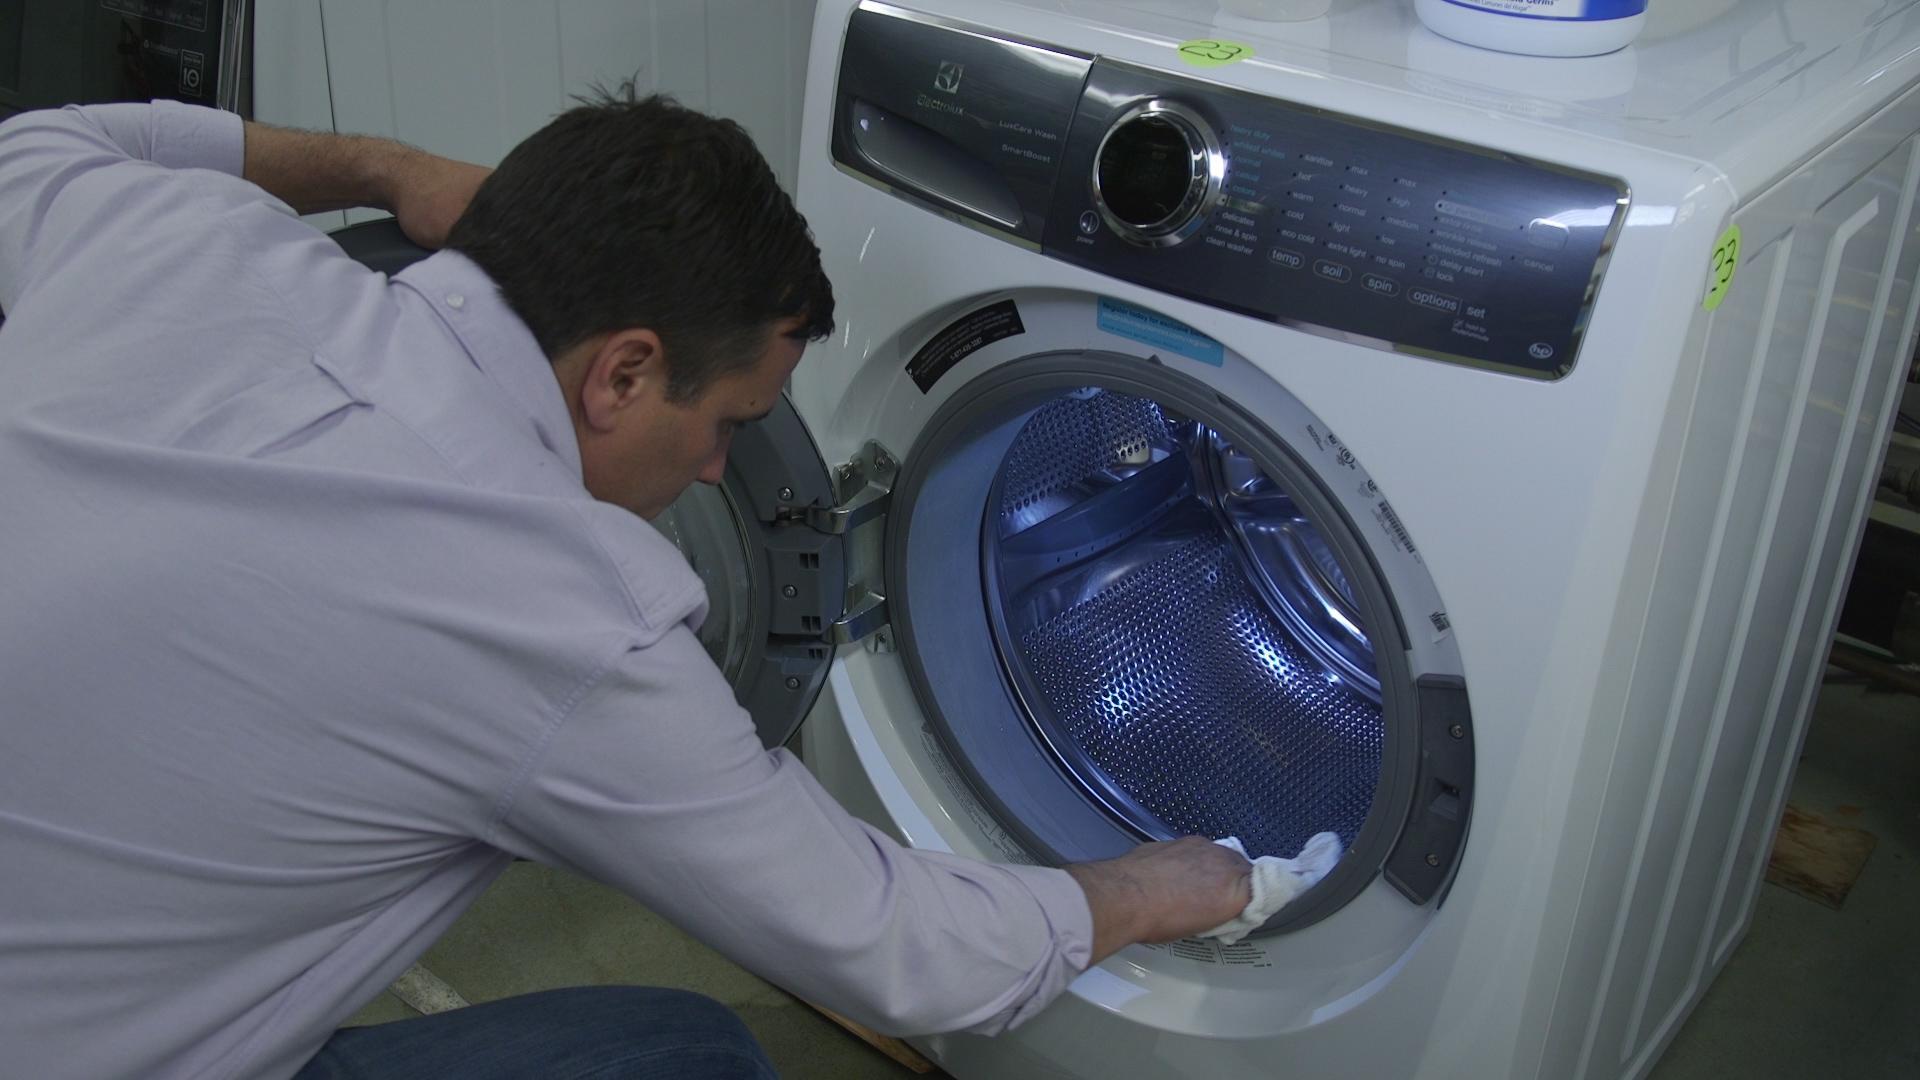 How To Clean A Front Load Washer